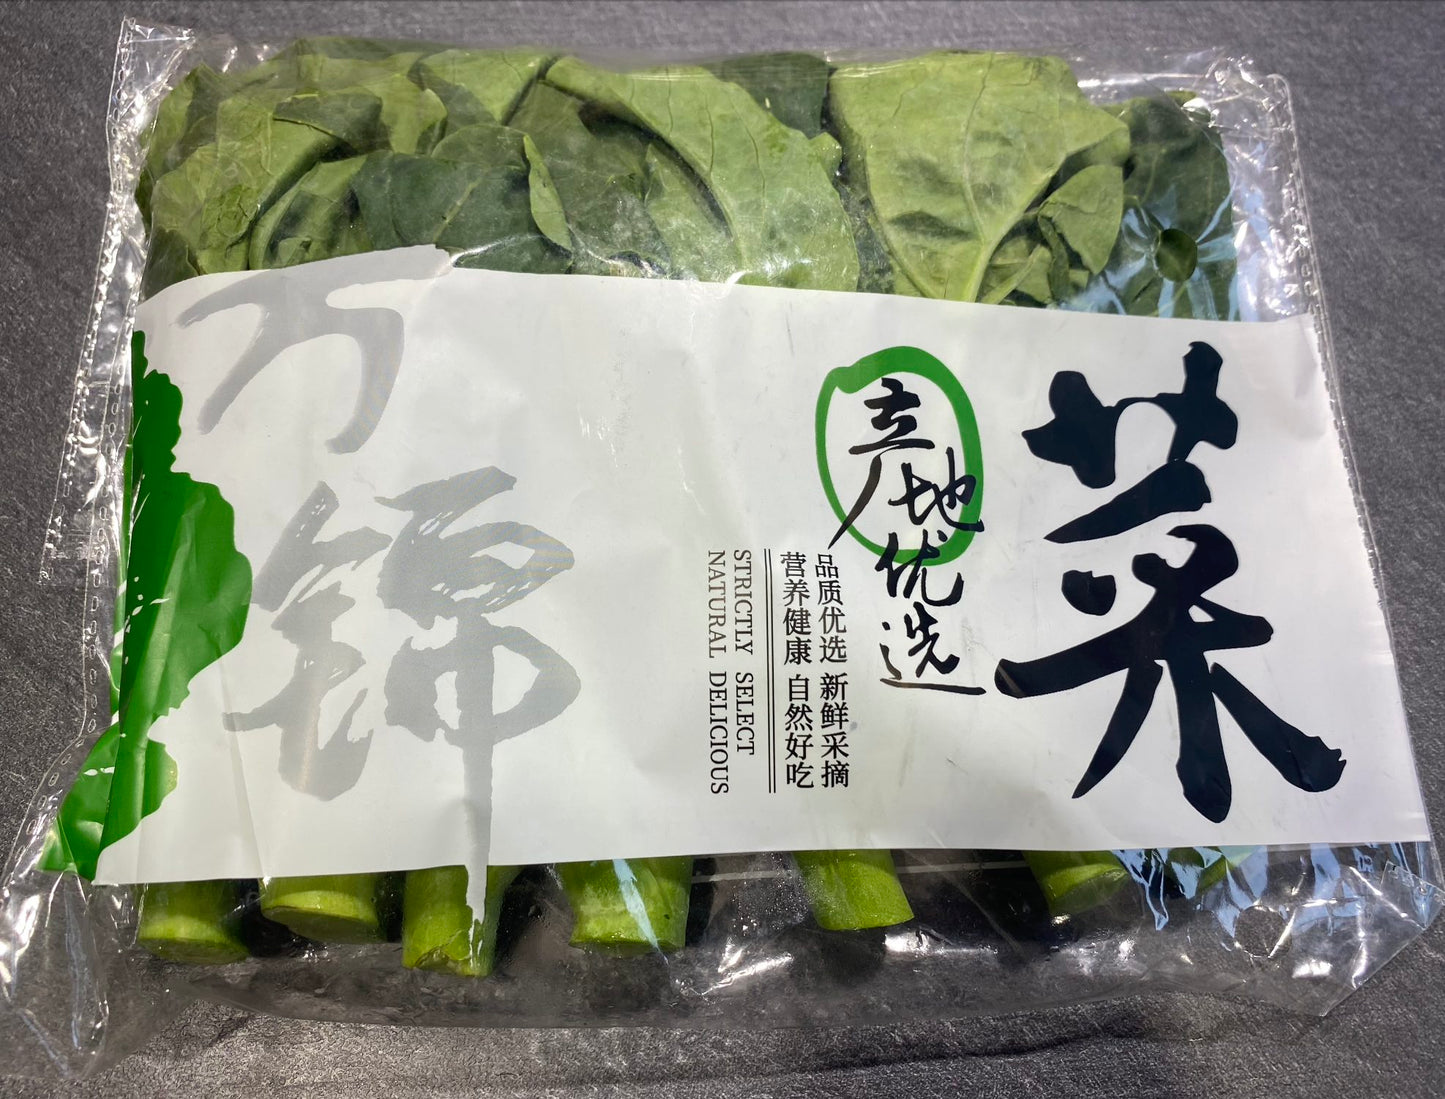 Chinese kale芥蓝